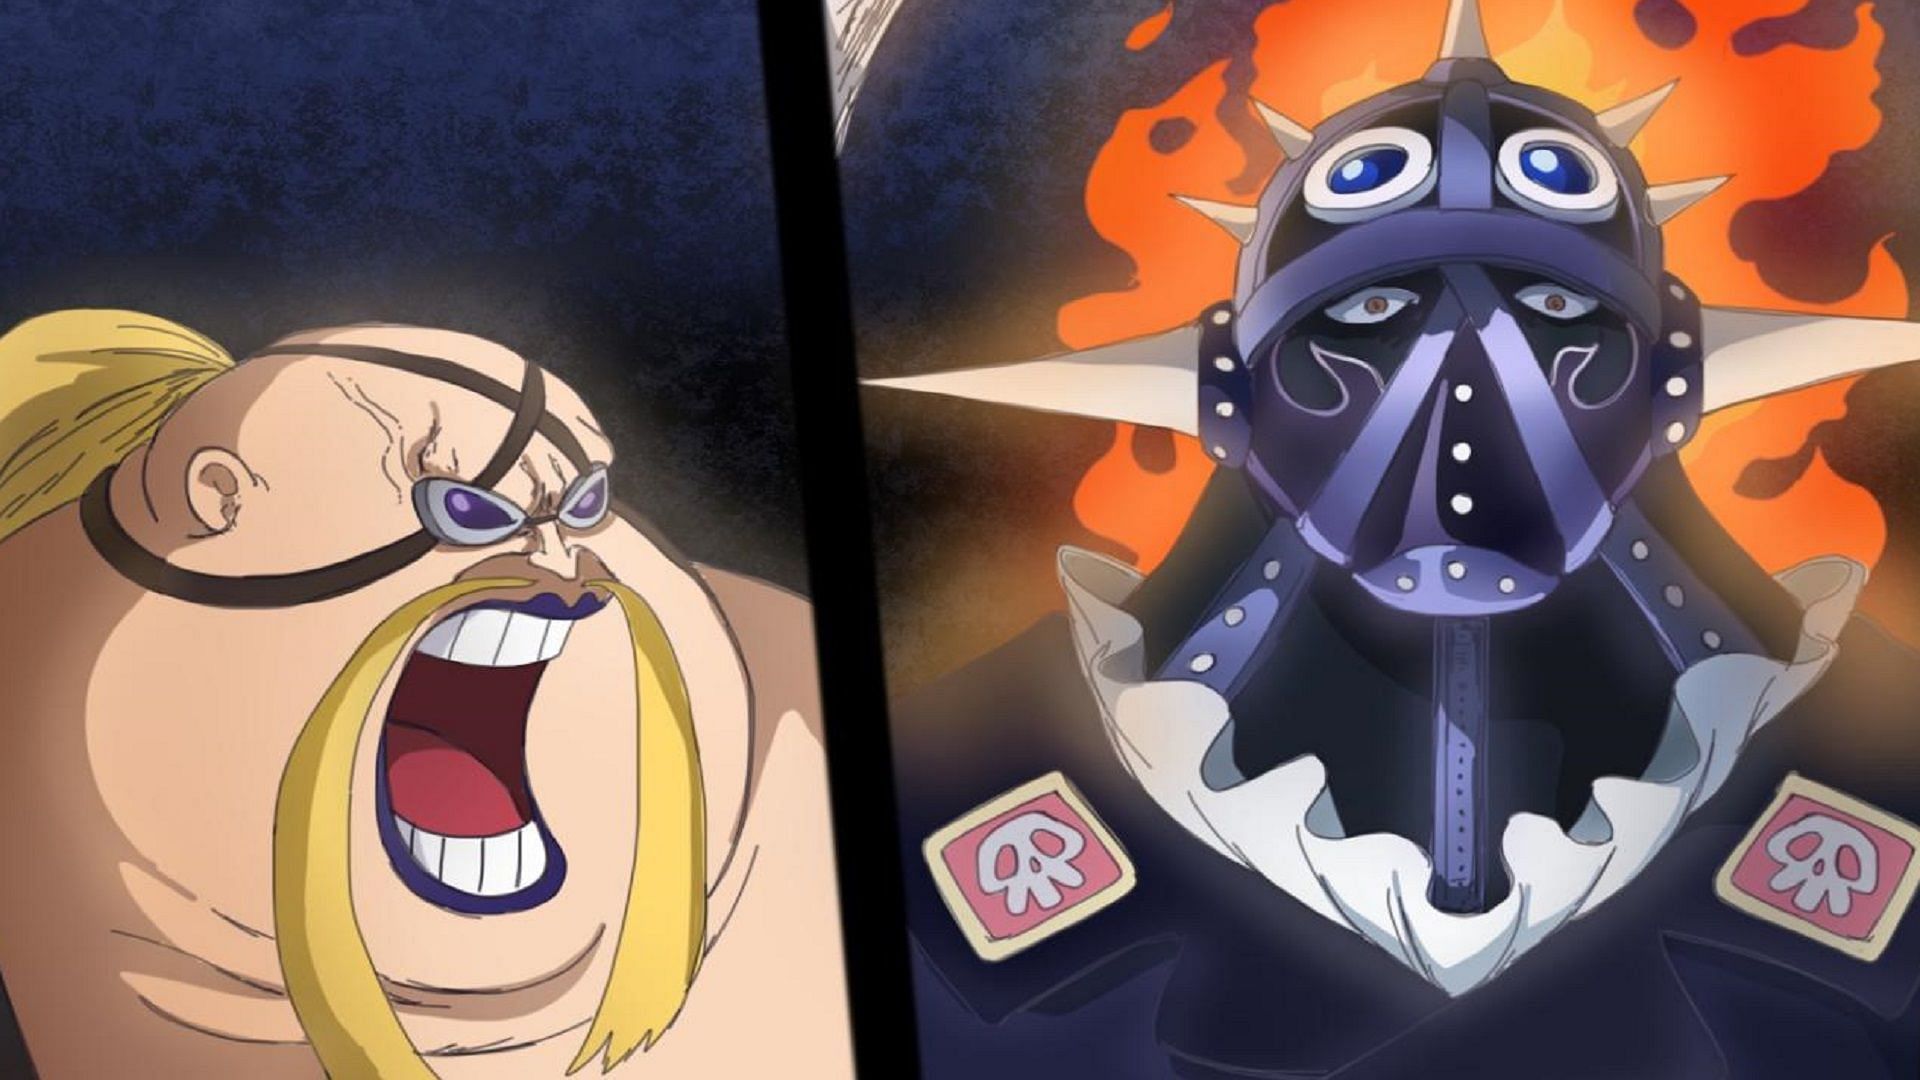 DROPPING LIKE FLIES  One Piece Episode 1035 Reaction + Review 